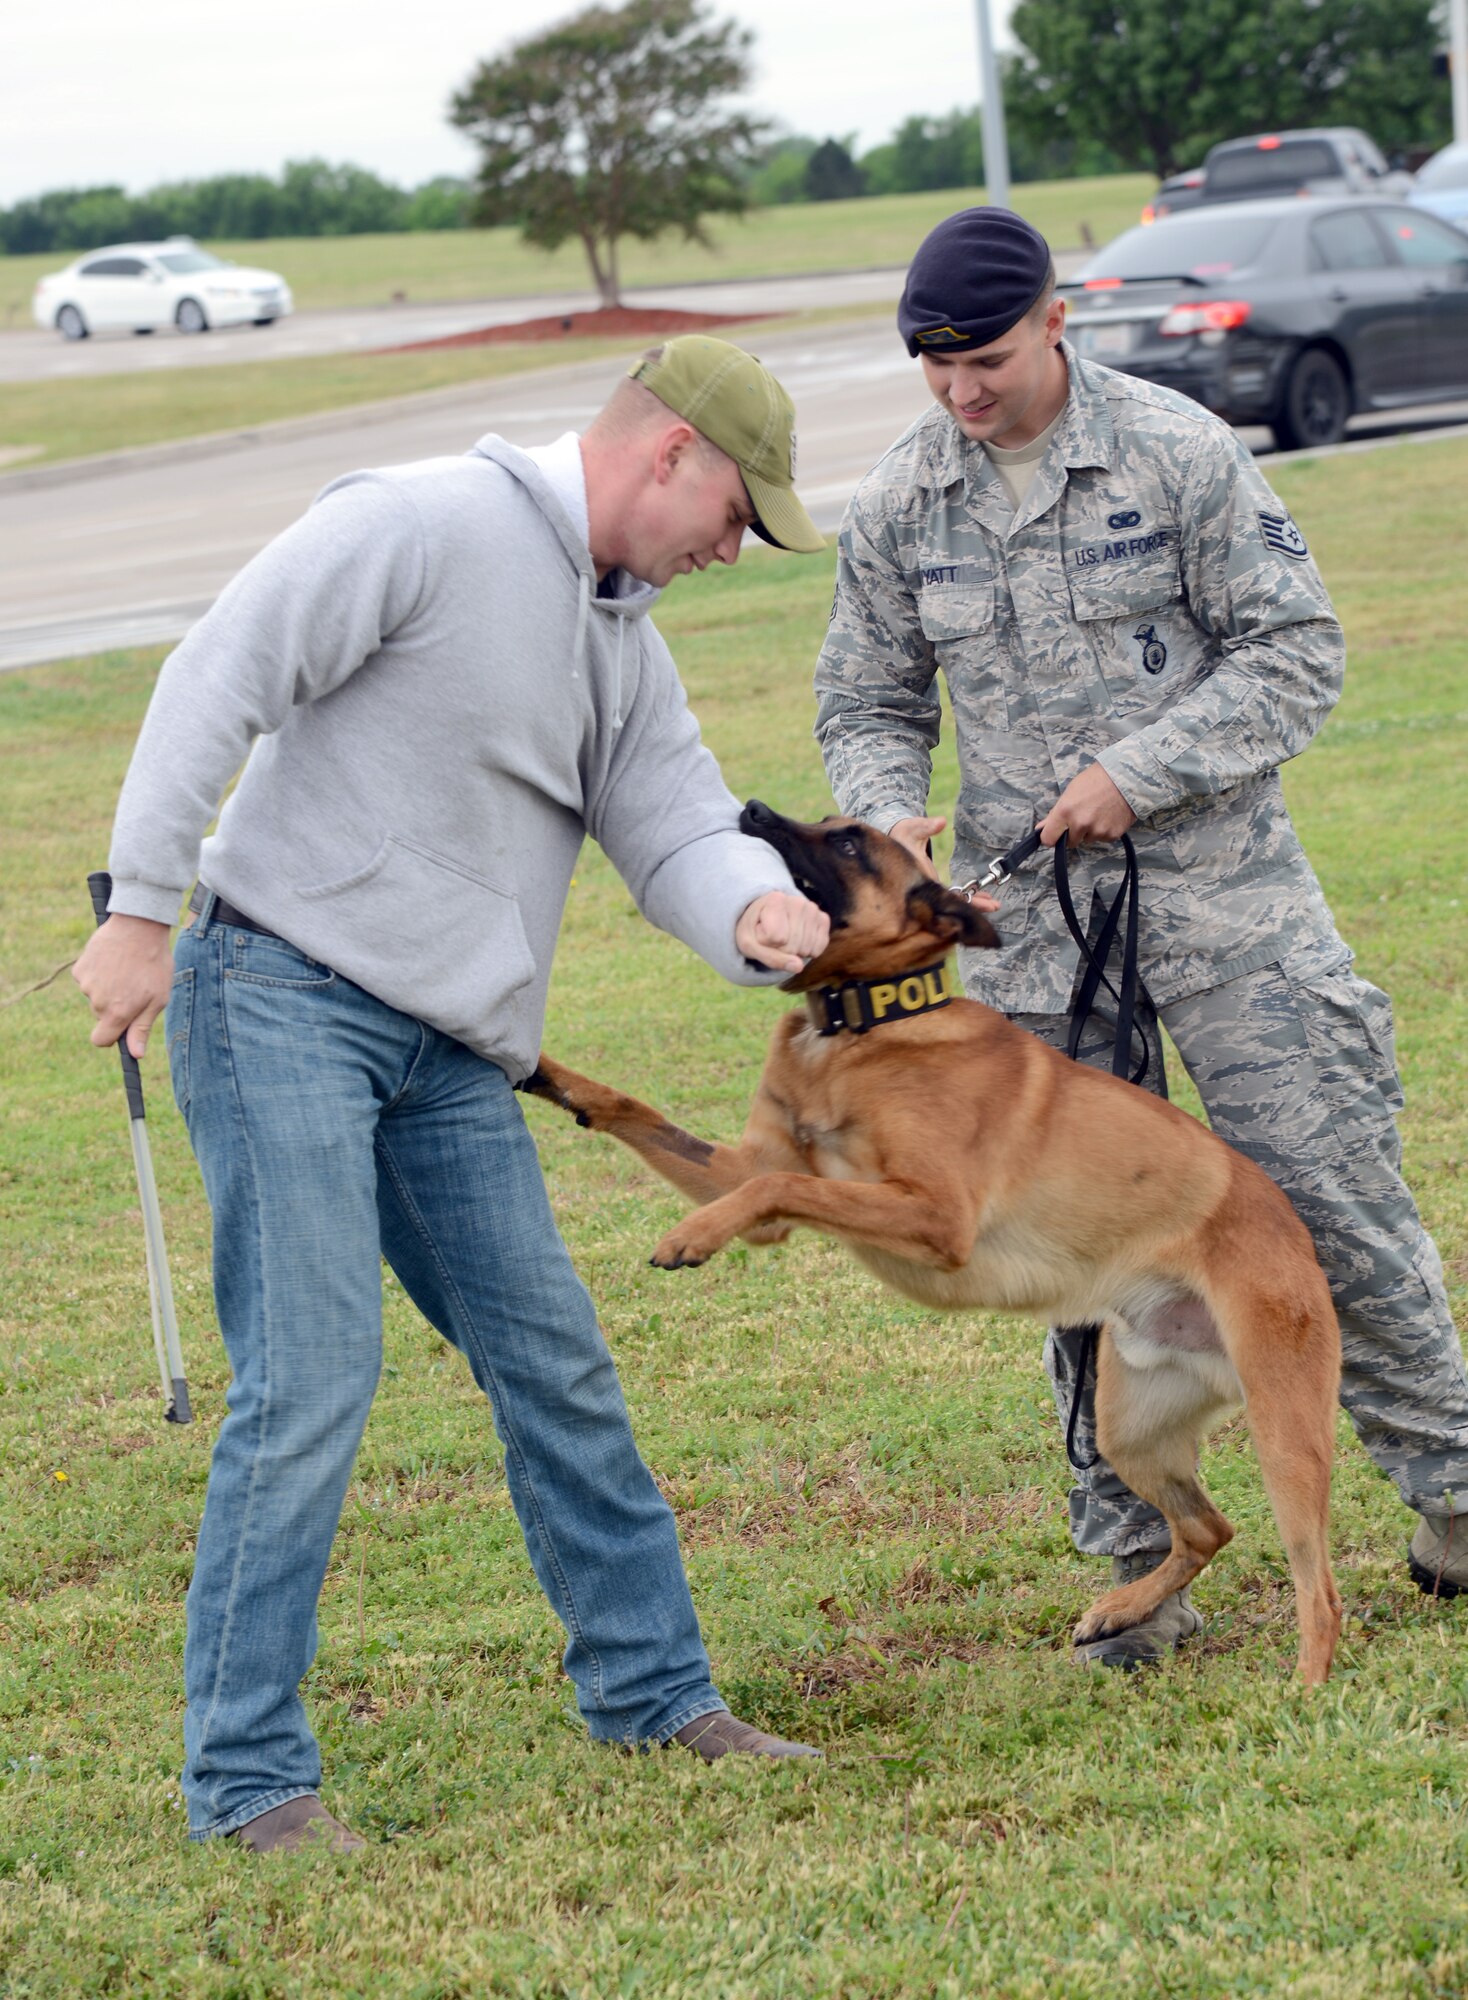 Military Working Dog Eelijah demonstrates how he can attack a person in plain clothes, Staff Sgt. Brett Jones, while still leashed to his handler, Staff Sgt. Cacy Wyatt, during a demonstration at the Tinker Exchange last week as part of National Police Week. (Air Force photos by Kelly White)